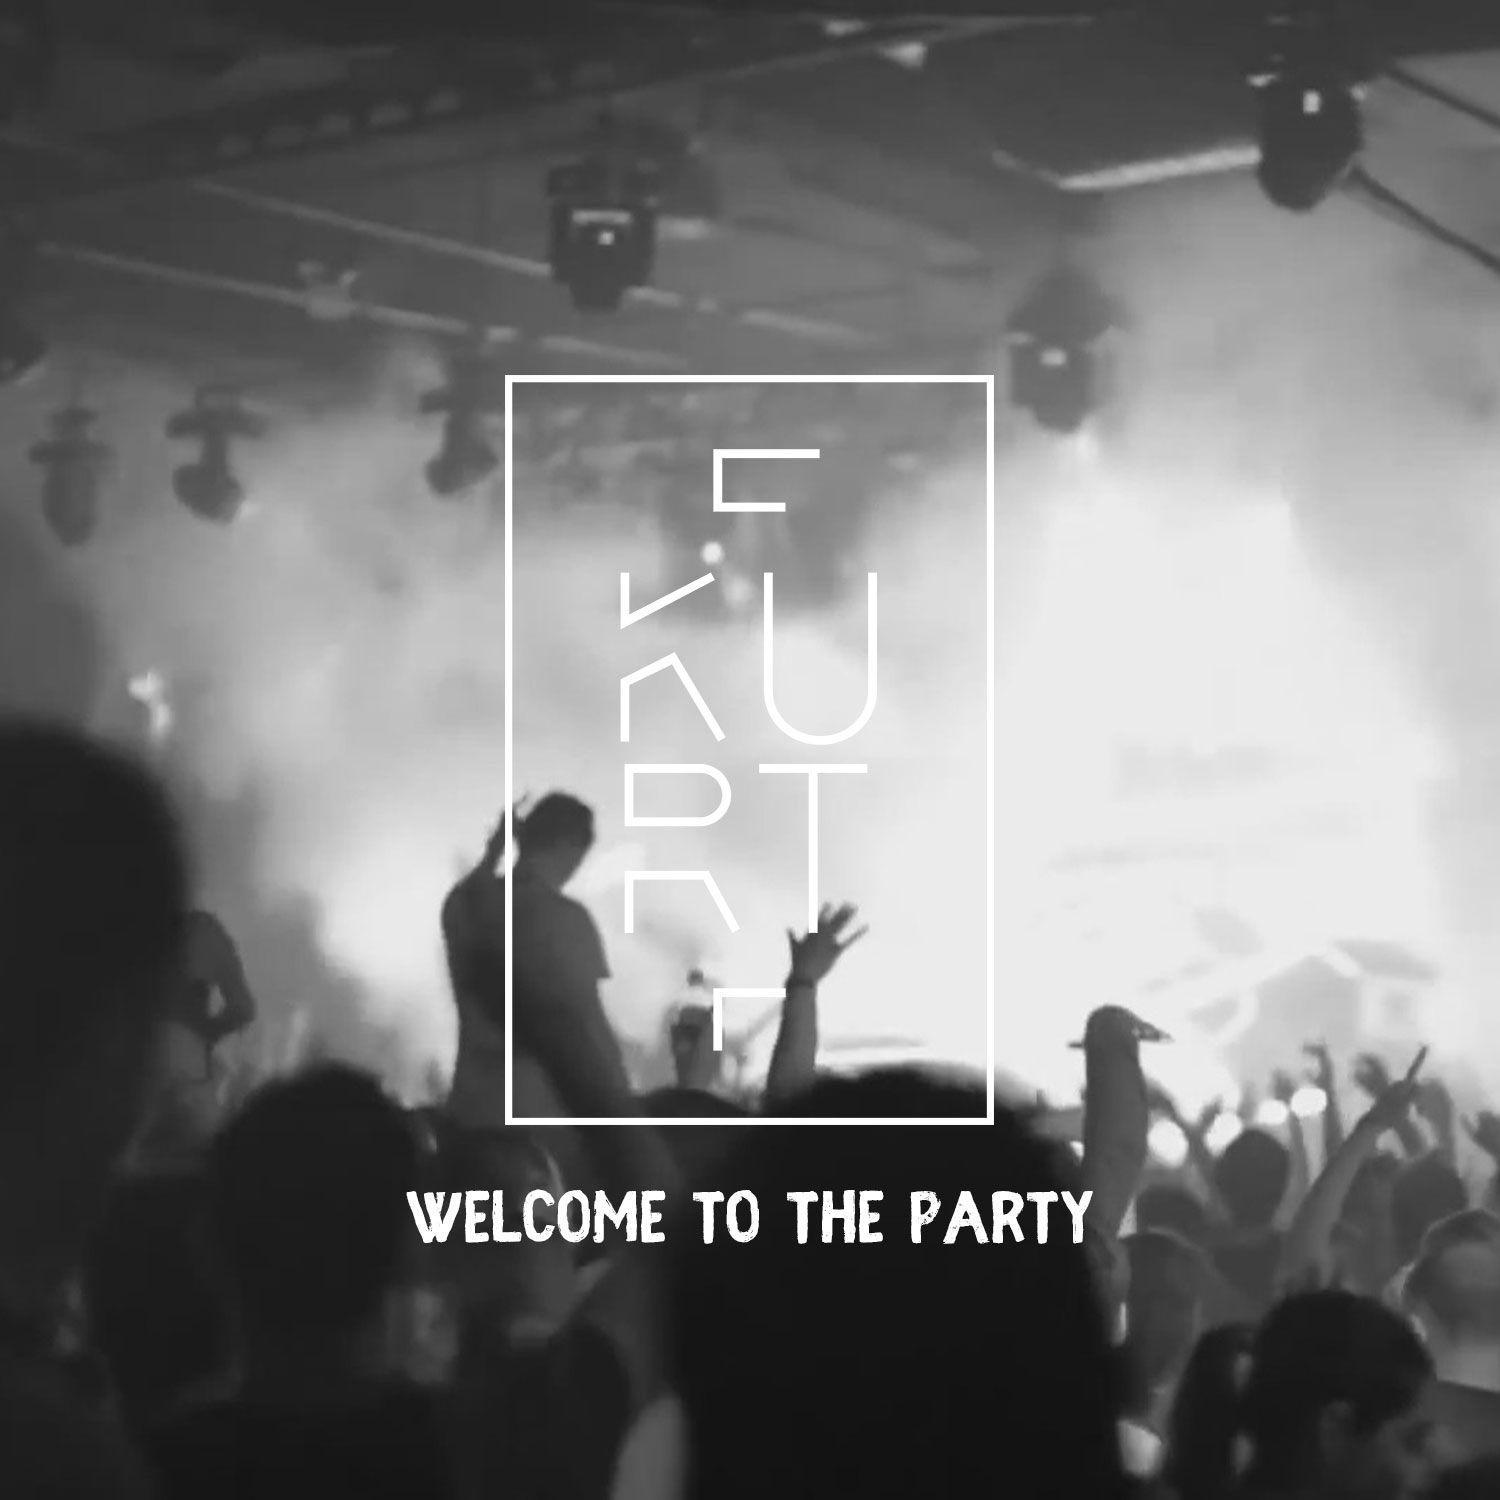 Kurt F - Welcome To The Party